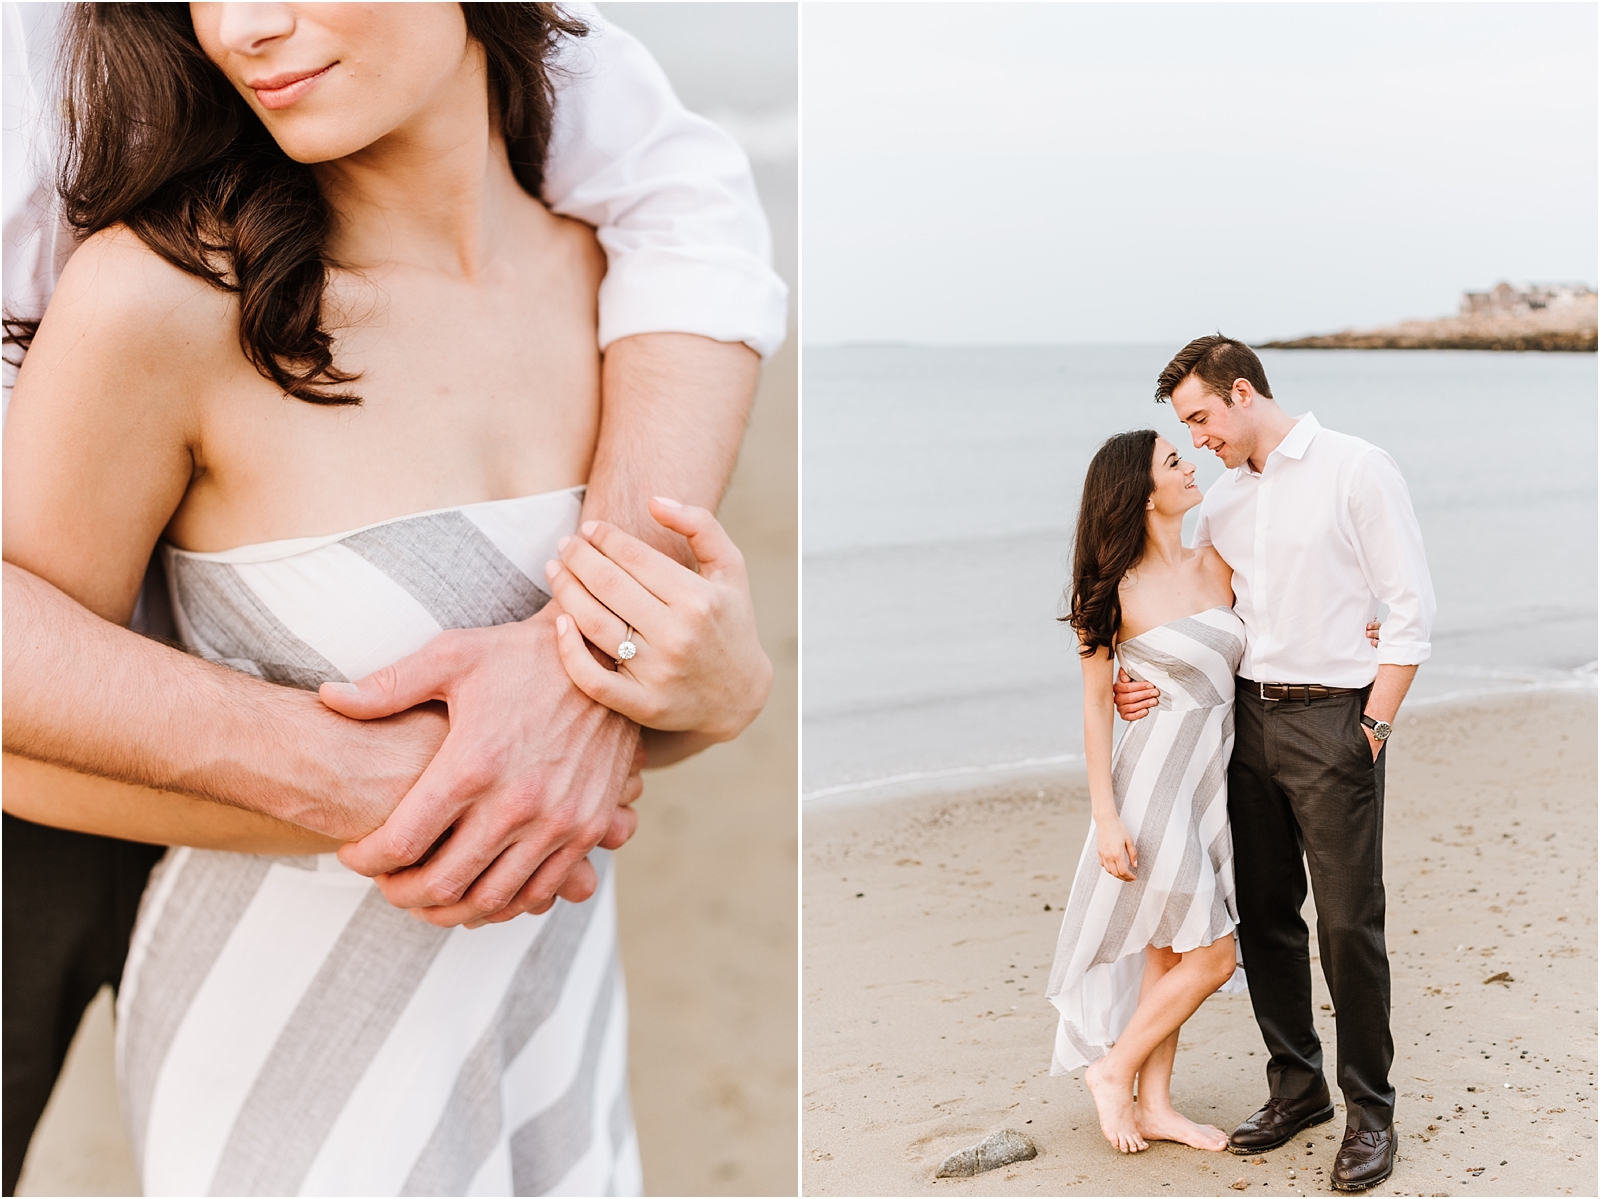 Romantic Summer Engagement Session at Halibut Point State Park in Rockport, MA by Boston Wedding Photographer Annmarie Swift